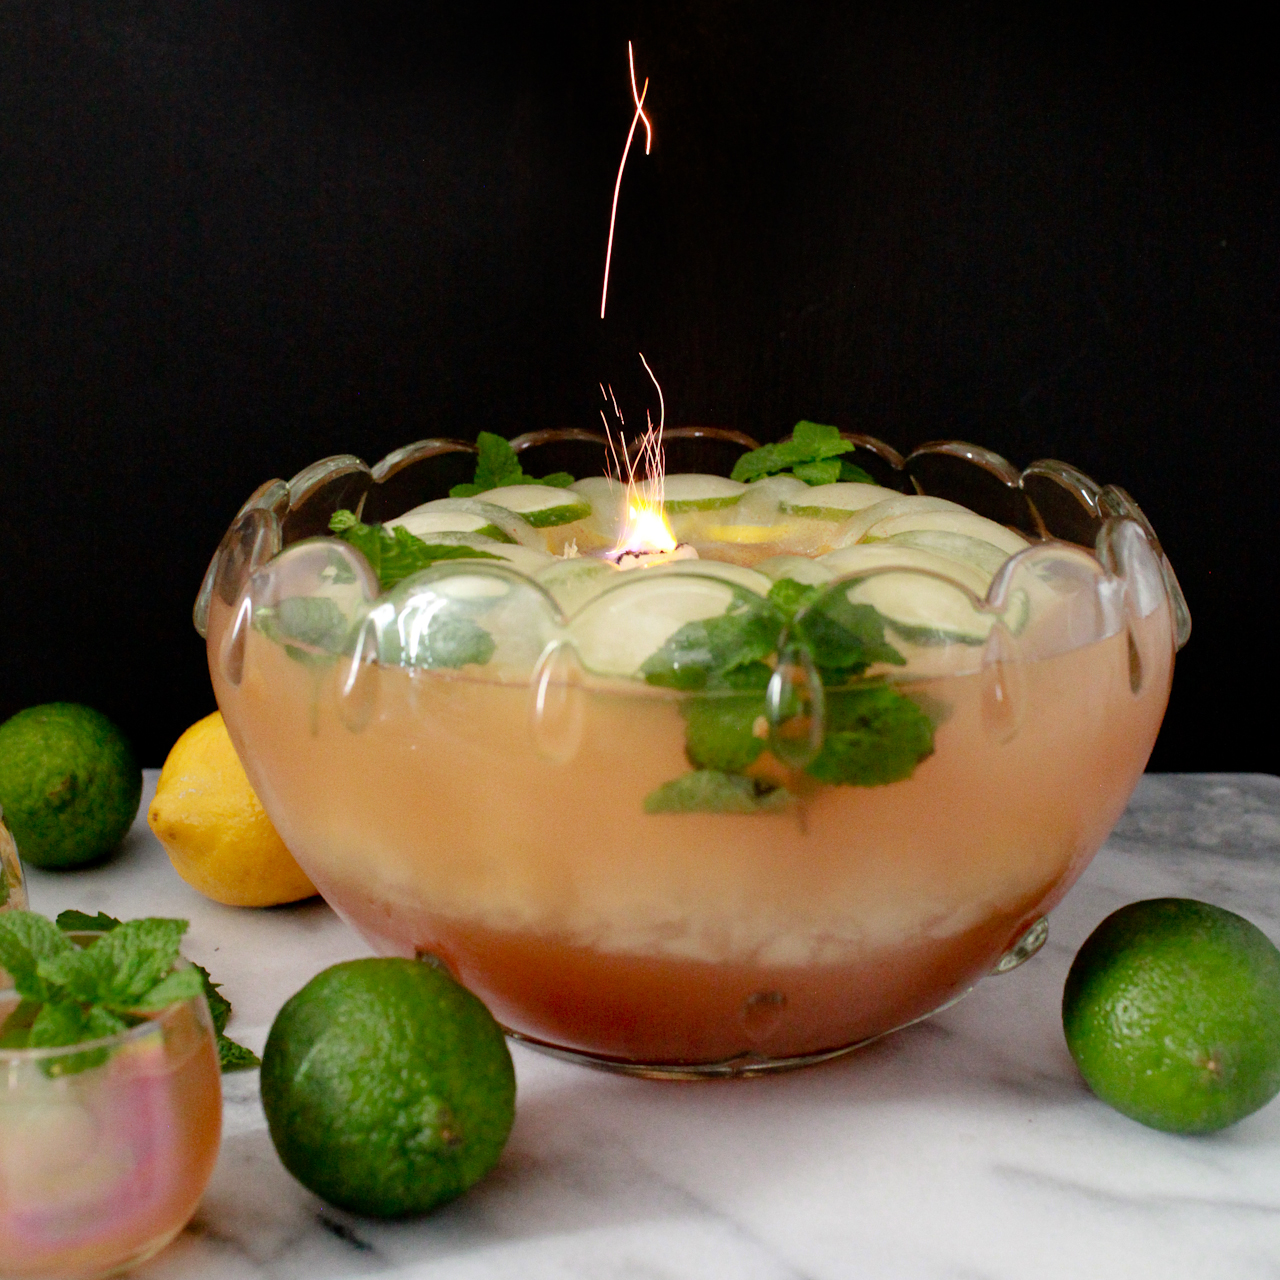 Planter&amp;#39;s Punch: A Tiki Bowl Rum Punch